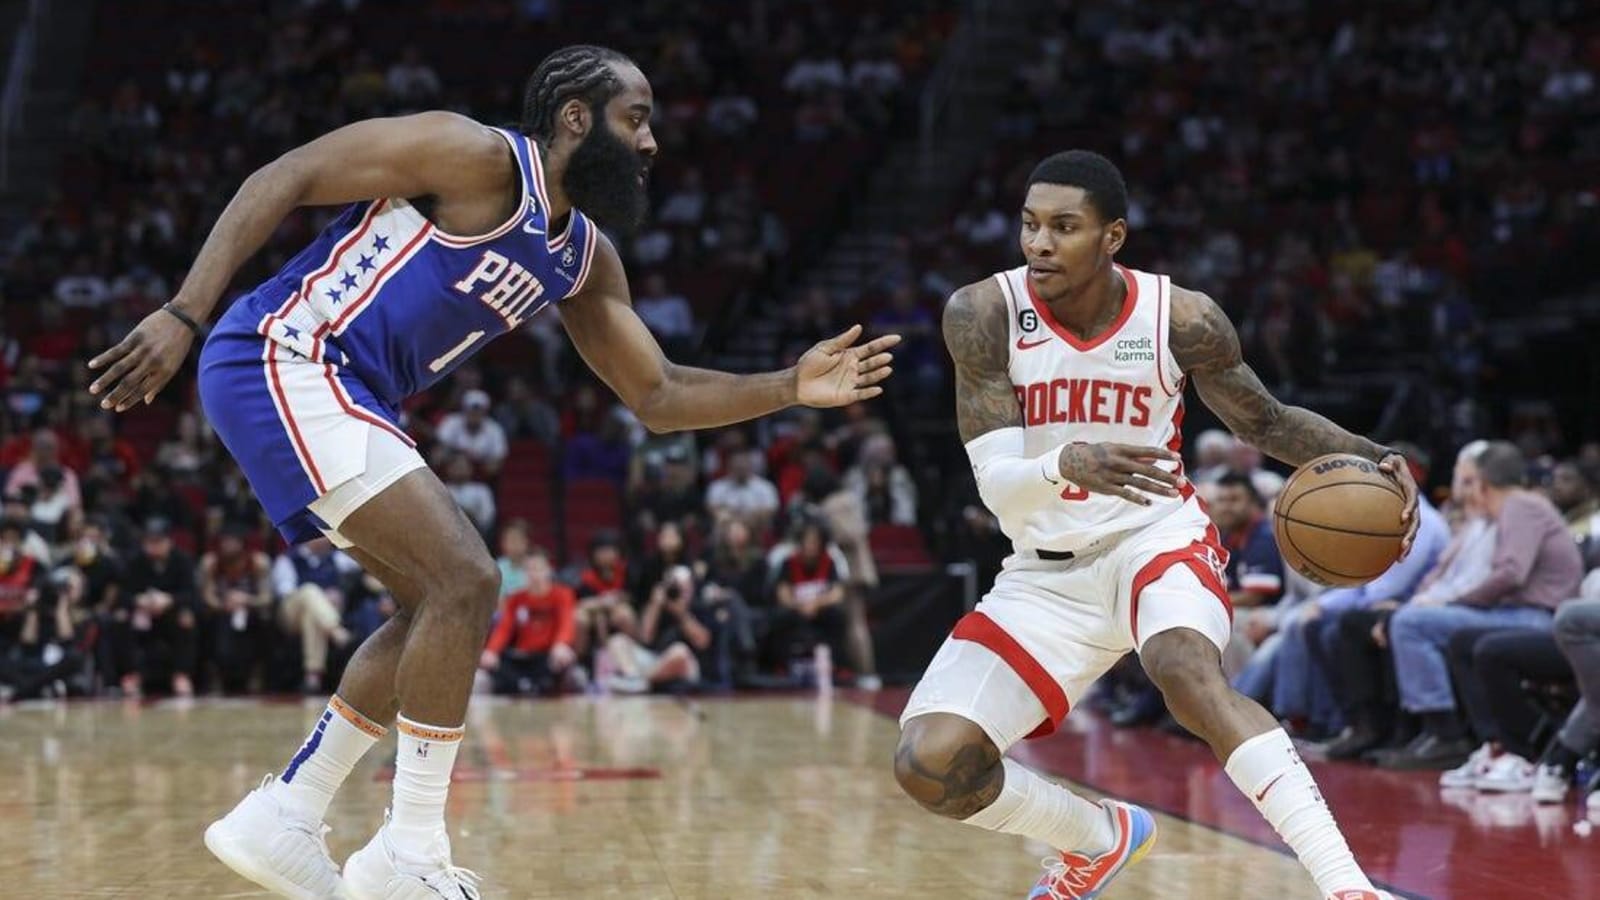 Rockets prevail over Sixers in double OT